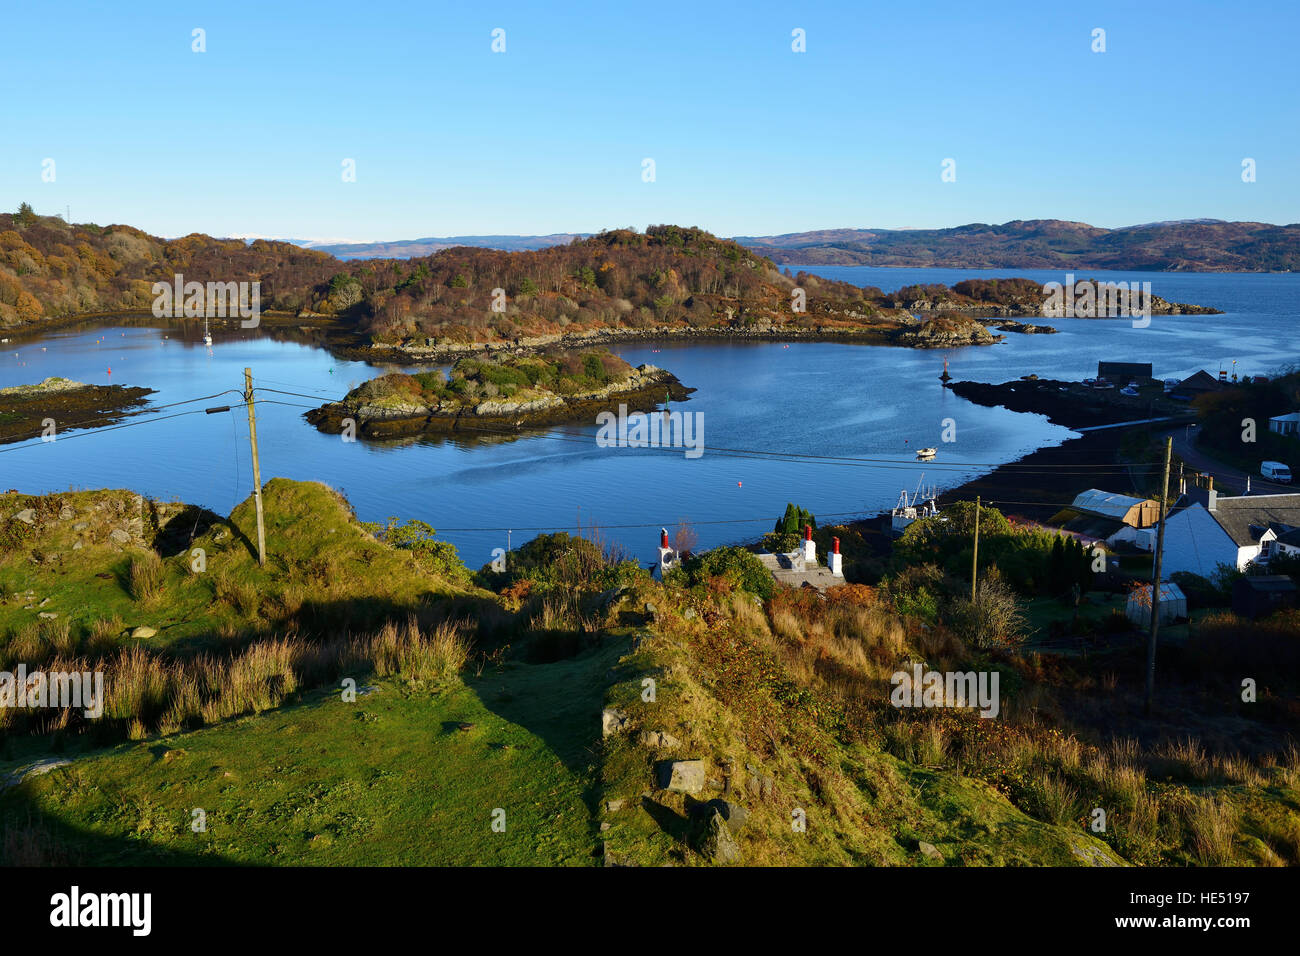 View across Loch Tarbert, an inlet of Loch Fyne, in Argyll and Bute, Scotland Stock Photo